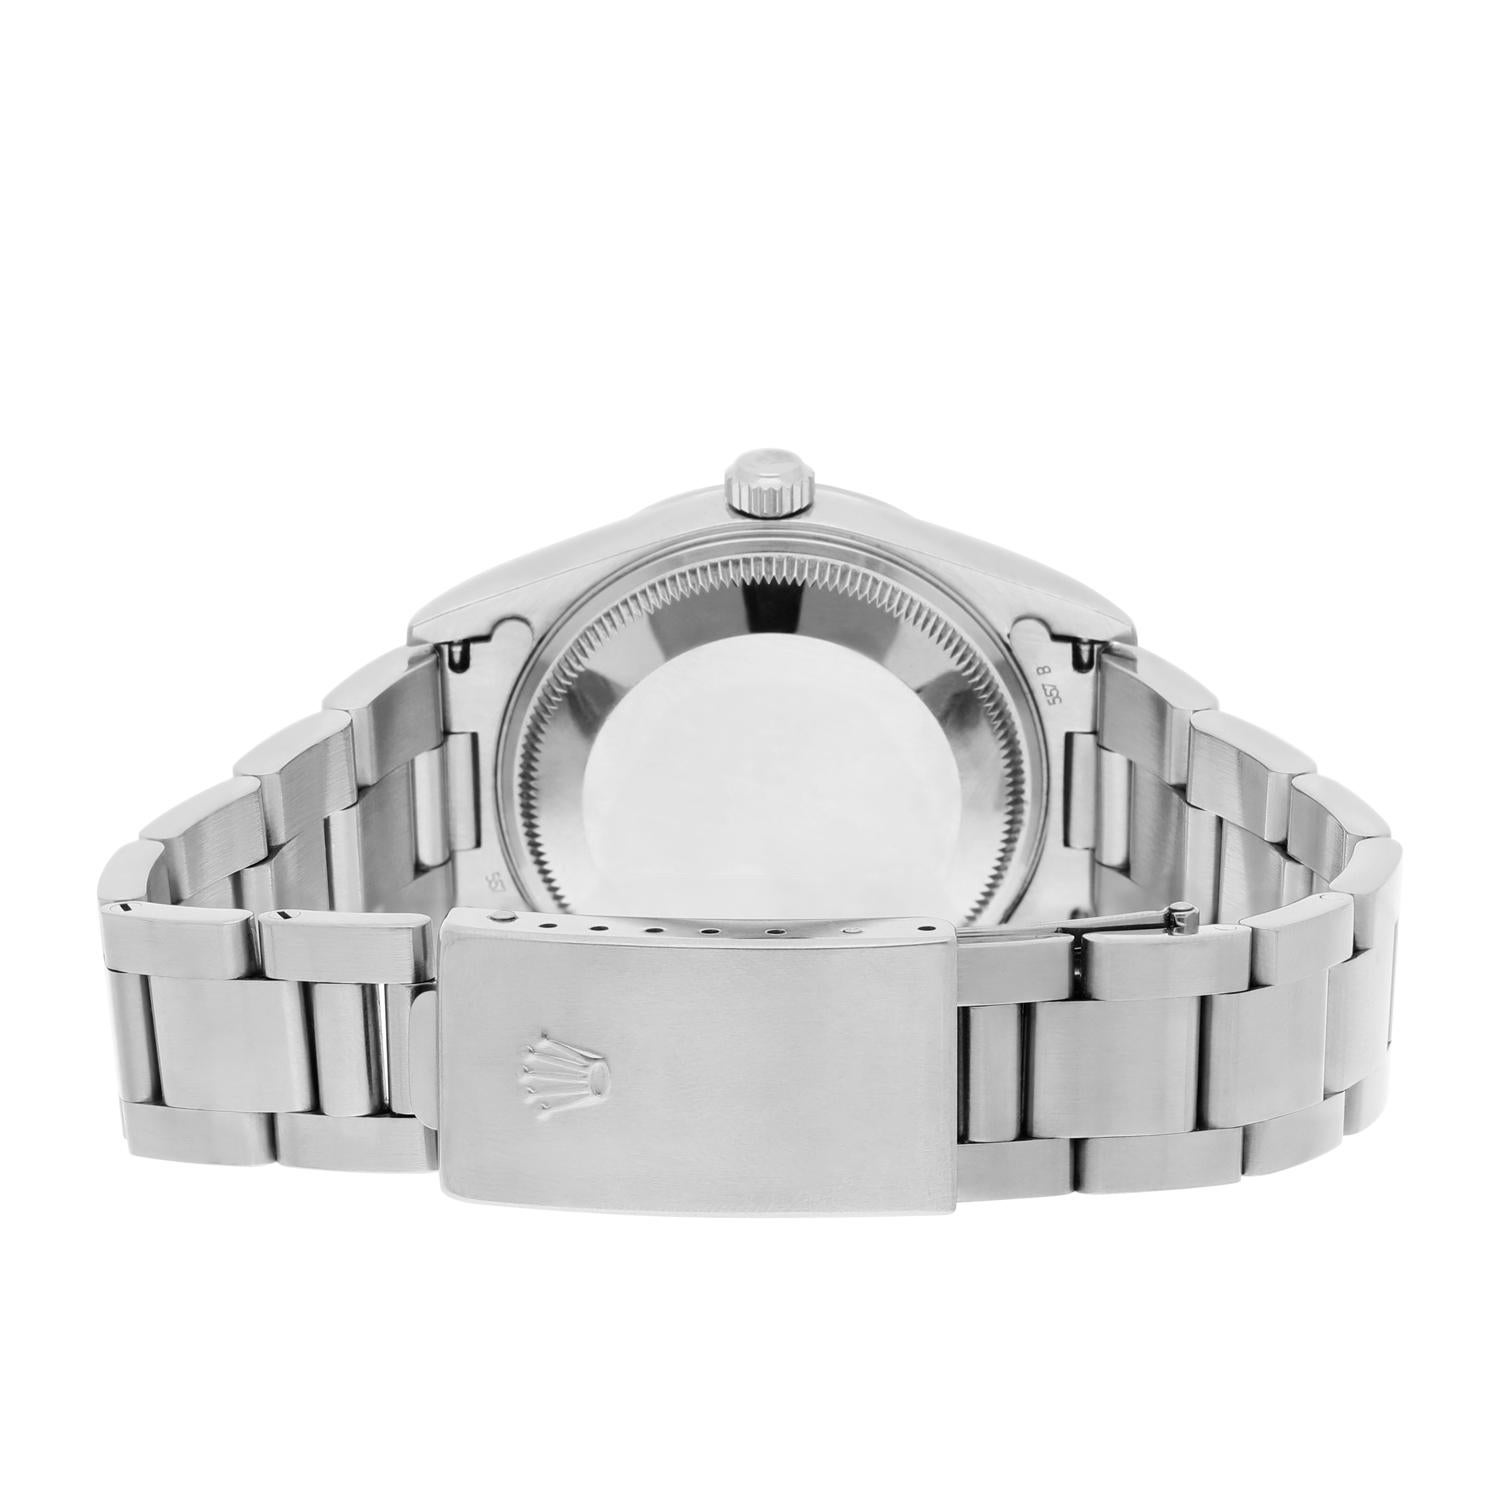 Rolex Date 34mm Stainless Steel Watch Oyster Band Silver Dial Circa 2001 15200 For Sale 2